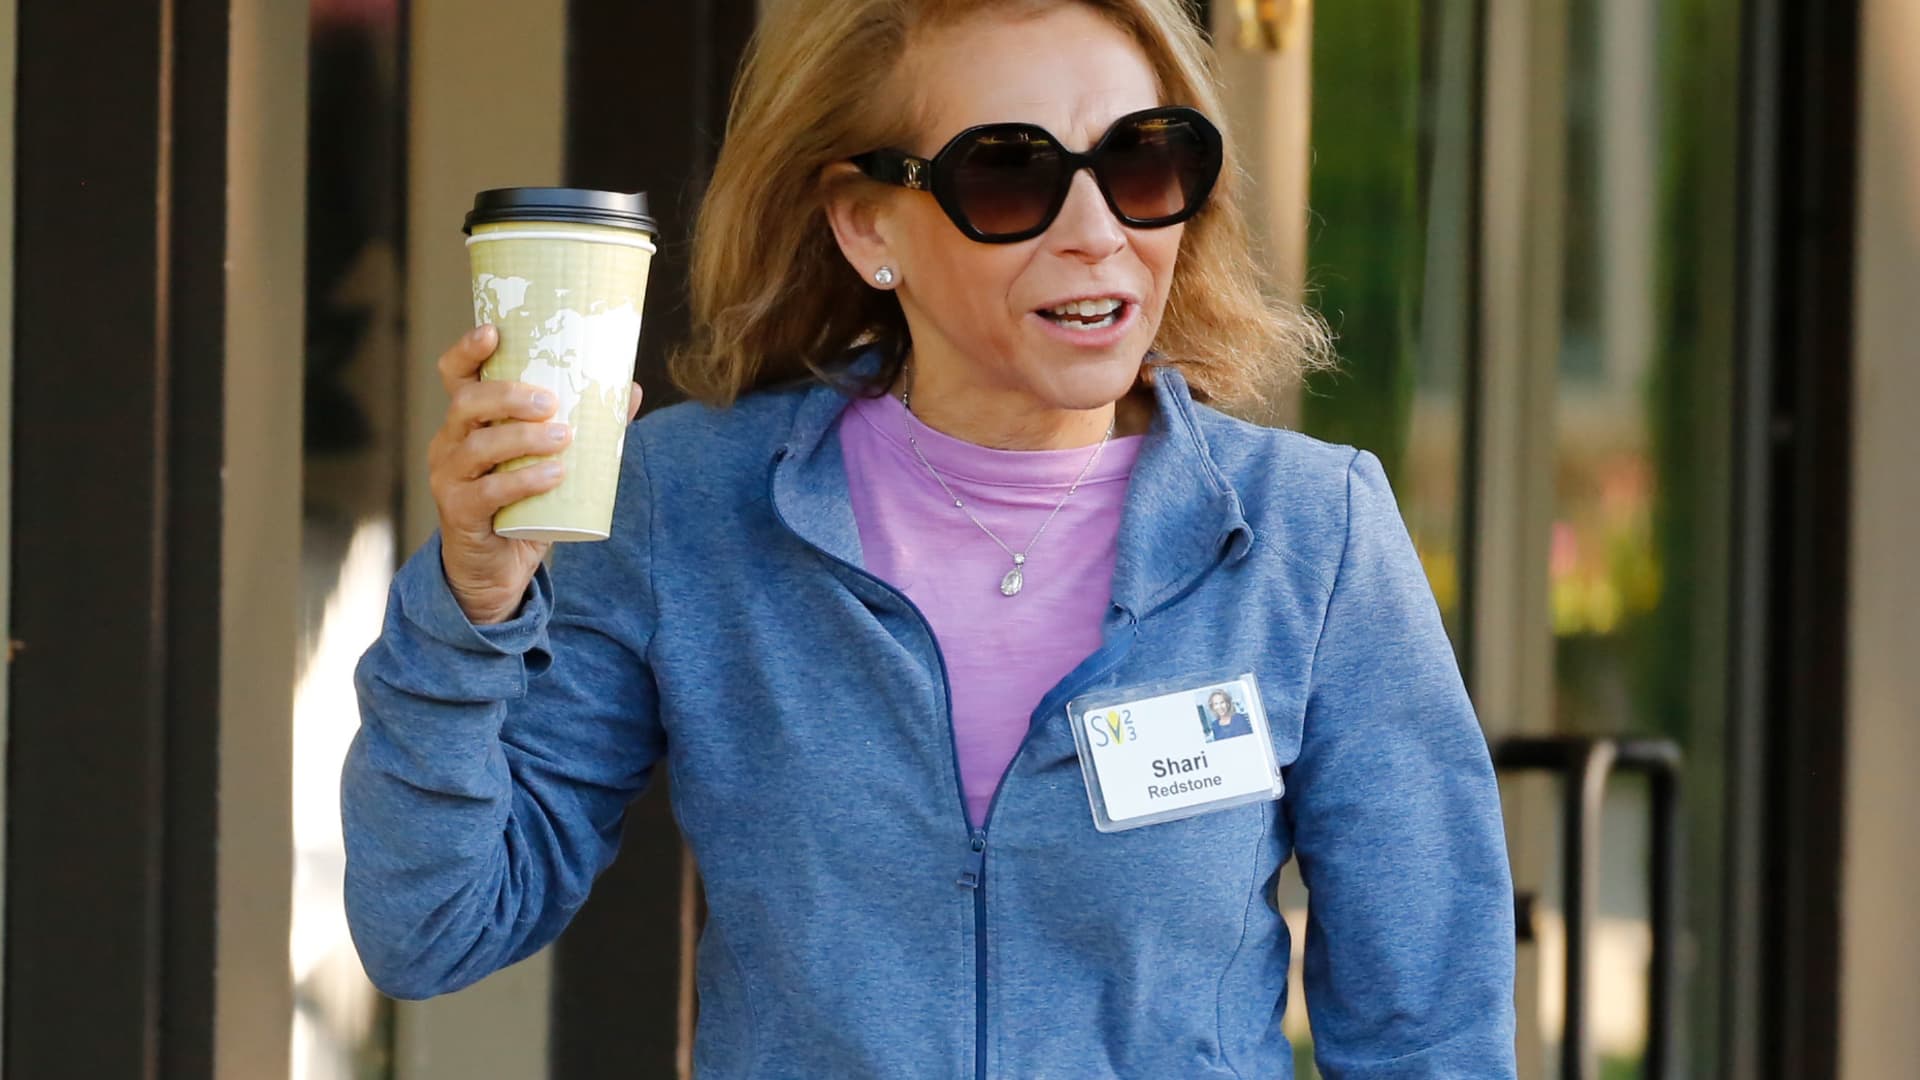 Shari Redstone, president of National Amusements and controlling shareholder of Paramount Global, walks to a morning session at the Allen & Company Sun Valley Conference in Sun Valley, Idaho, July 12, 2023.